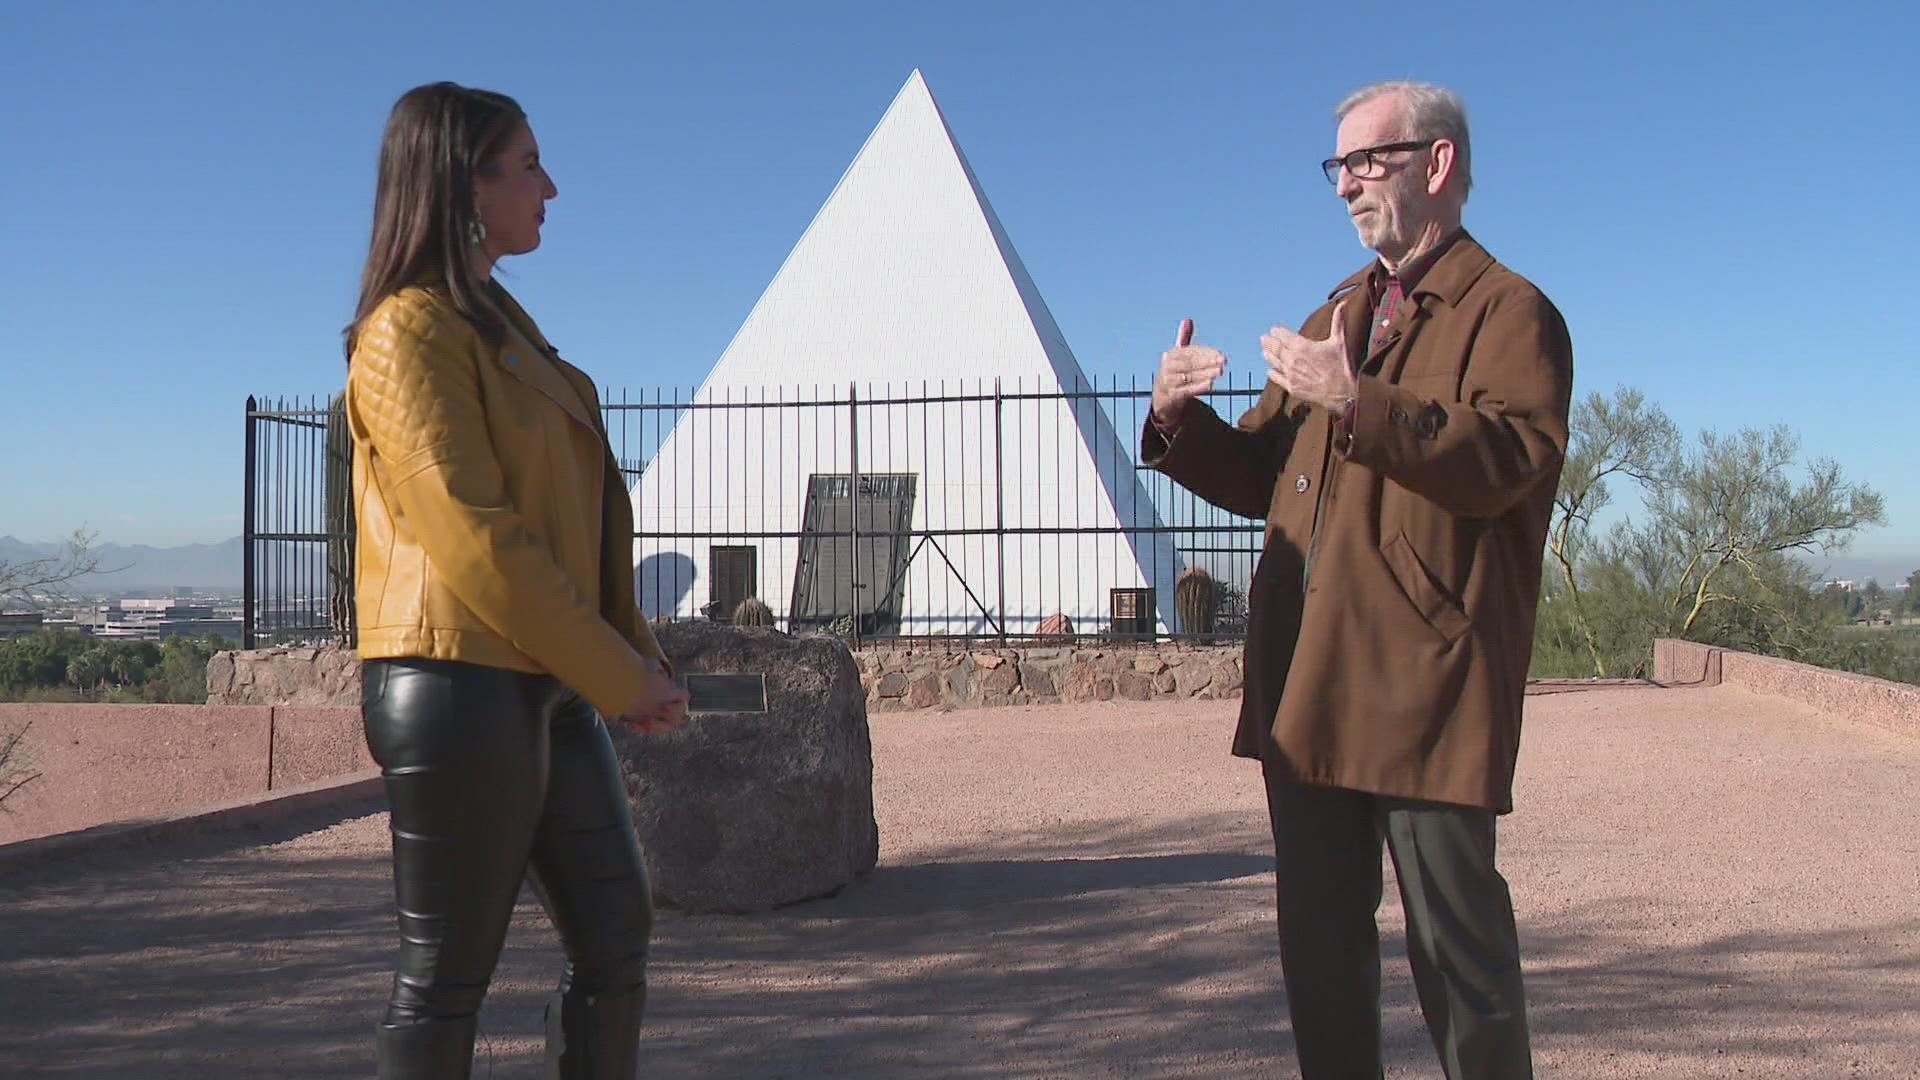 Hunt's Tomb in Phoenix has a lengthy history dating back to the 1930s. Emily Pritchard takes a look at the iconic Valley pyramid.